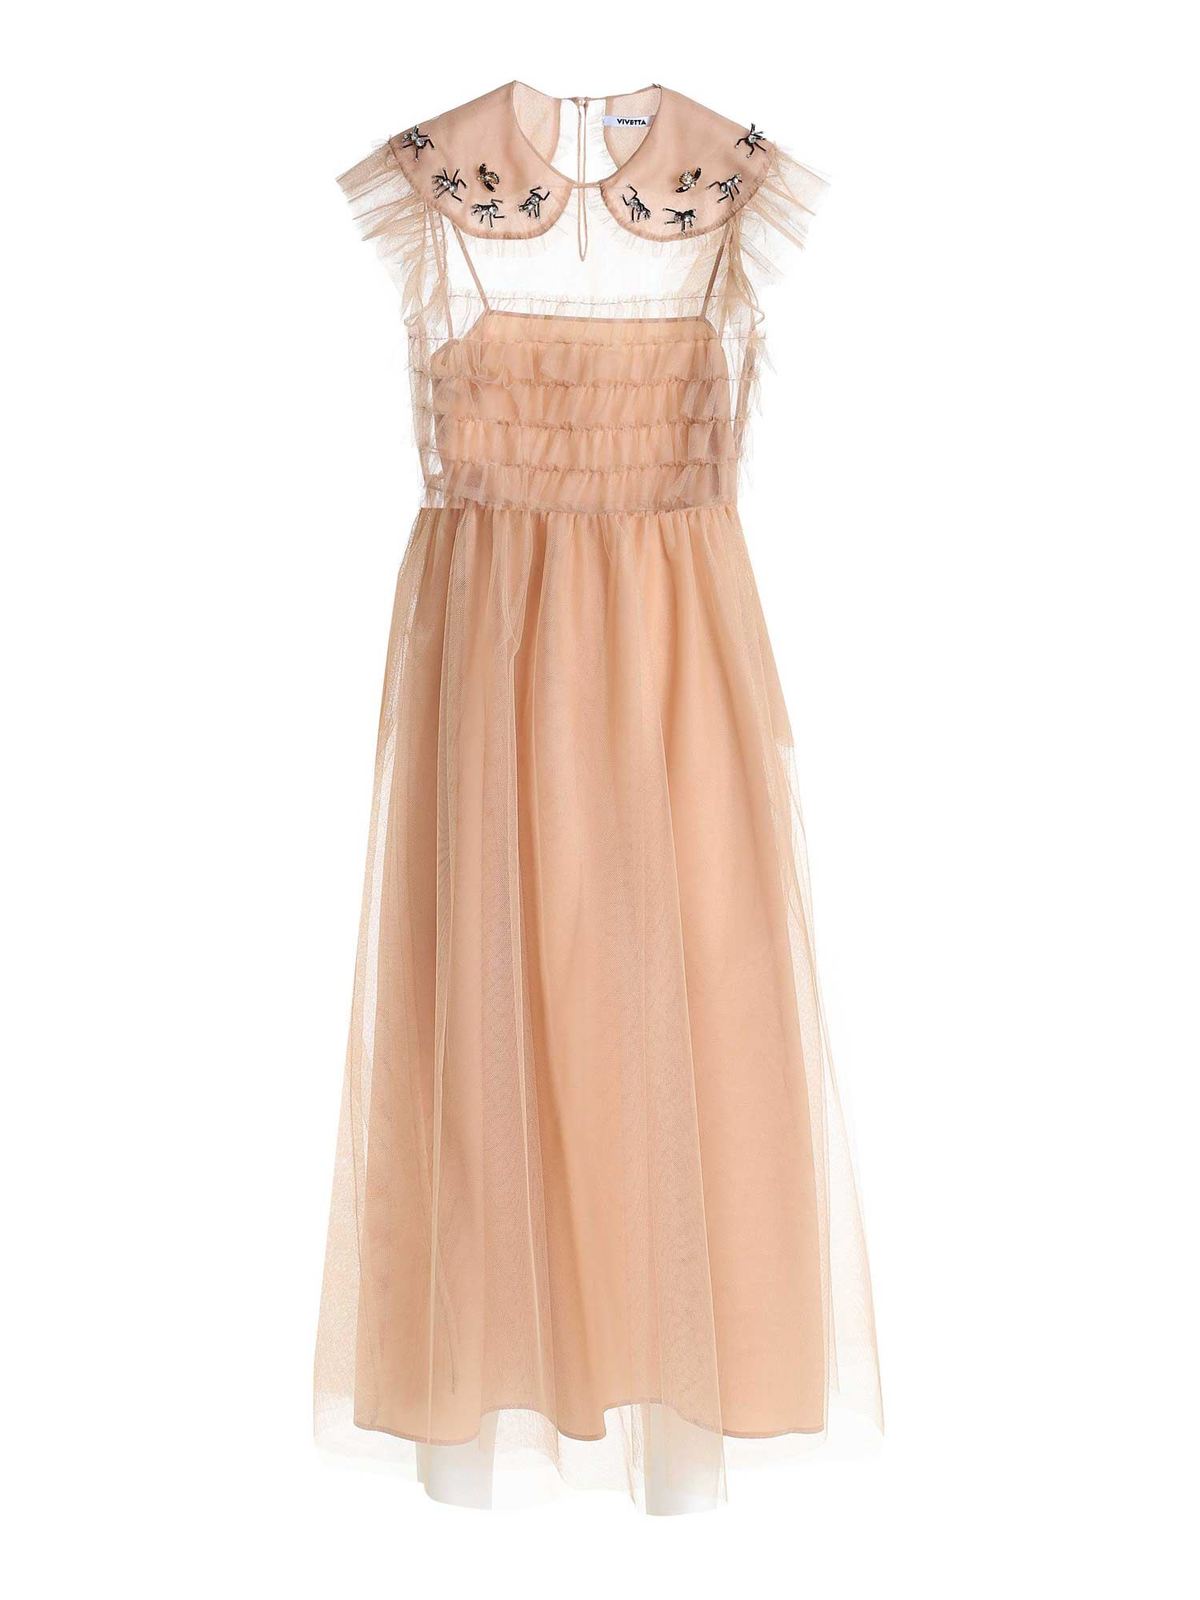 VIVETTA JEWEL EMBROIDERY TULLE DRESS IN NUDE COLOR